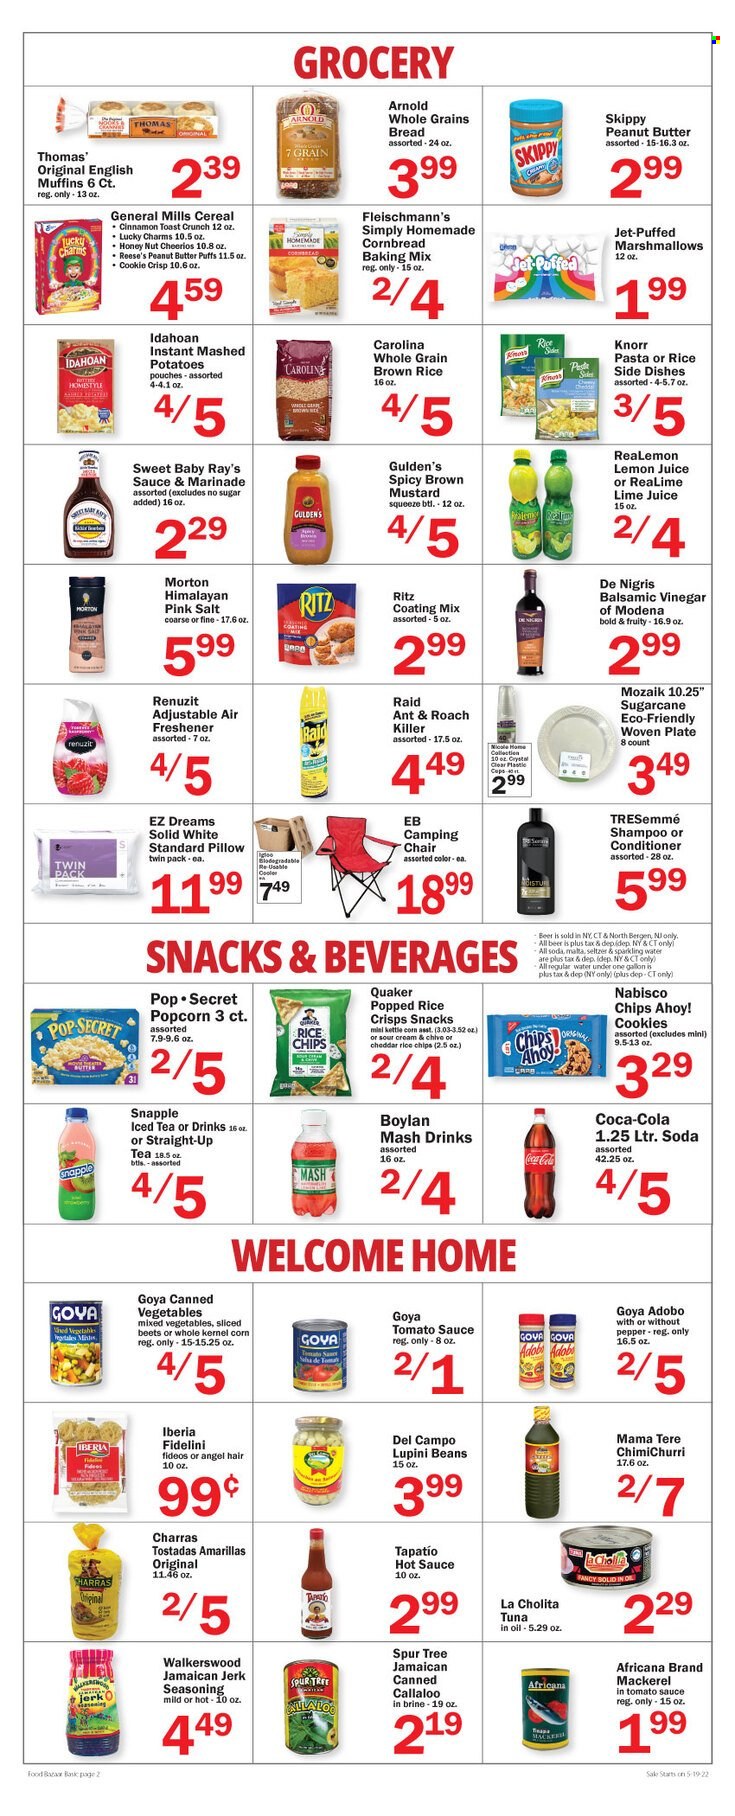 thumbnail - Food Bazaar Flyer - 05/19/2022 - 05/25/2022 - Sales products - bread, english muffins, corn bread, tostadas, puffs, beans, sugar cane, mackerel, tuna, Knorr, Quaker, cheese, Reese's, mixed vegetables, cookies, marshmallows, snack, Chips Ahoy!, RITZ, kettle corn, chips, popcorn, rice crisps, Goya, cereals, Cheerios, brown rice, rice, spice, cinnamon, adobo sauce, mustard, hot sauce, marinade, balsamic vinegar, peanut butter, Coca-Cola, ice tea, Snapple, seltzer water, soda, sparkling water, lemon juice, sake, beer. Page 2.